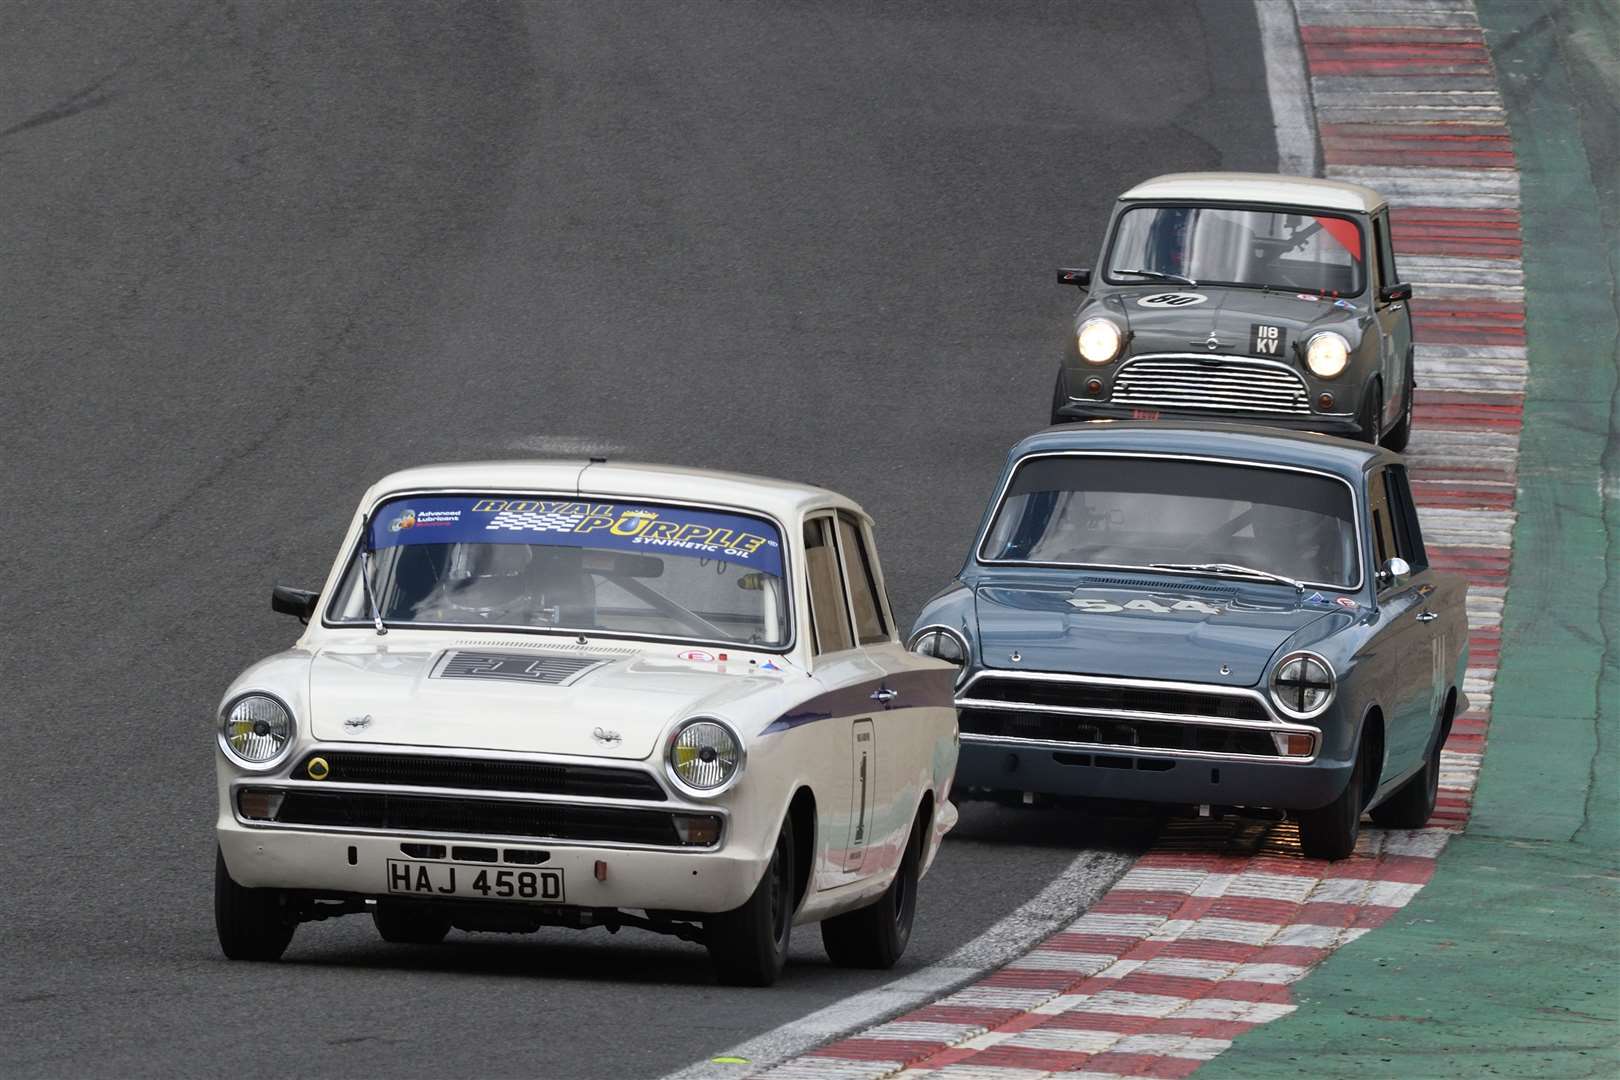 Mike Gardiner (1) scored victory in the first Historic Touring Car race in his 1965 Ford Lotus Cortina